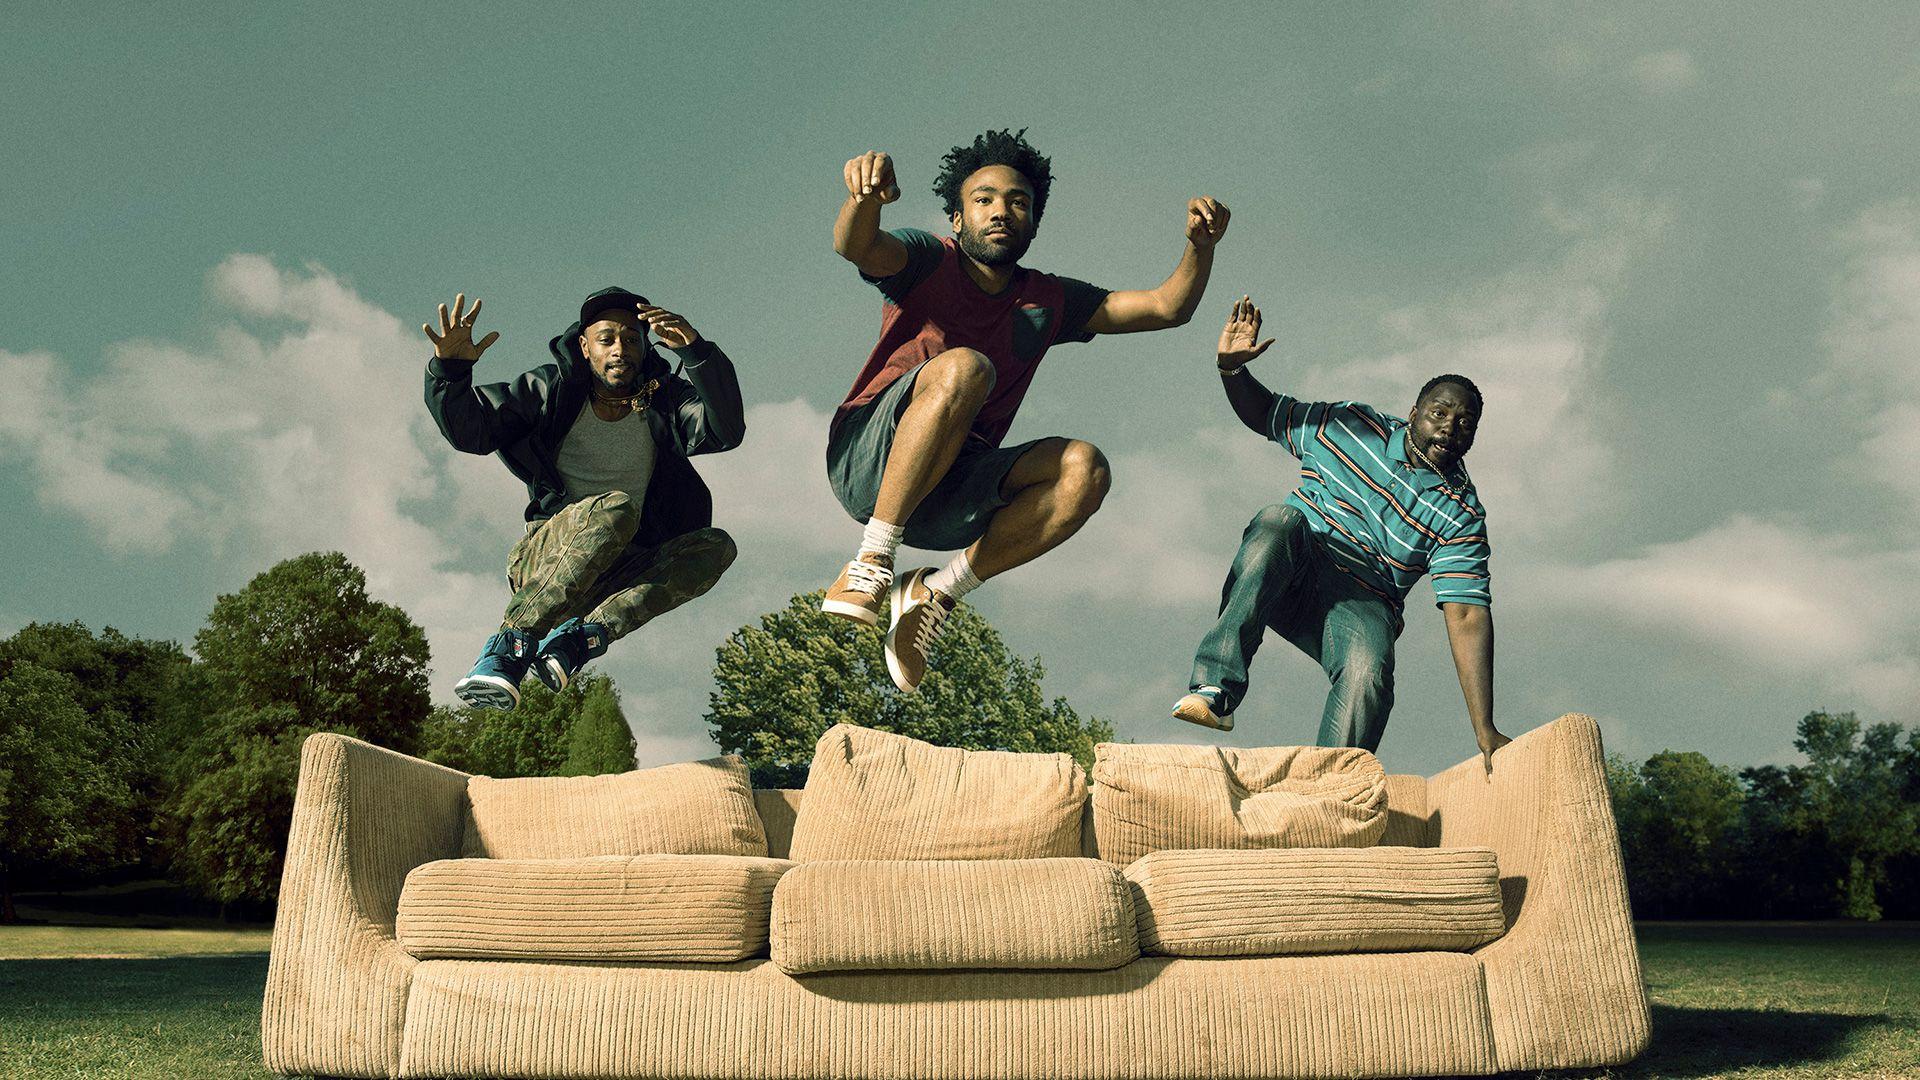 Are You Watching Donald Glover's “Atlanta” Yet?